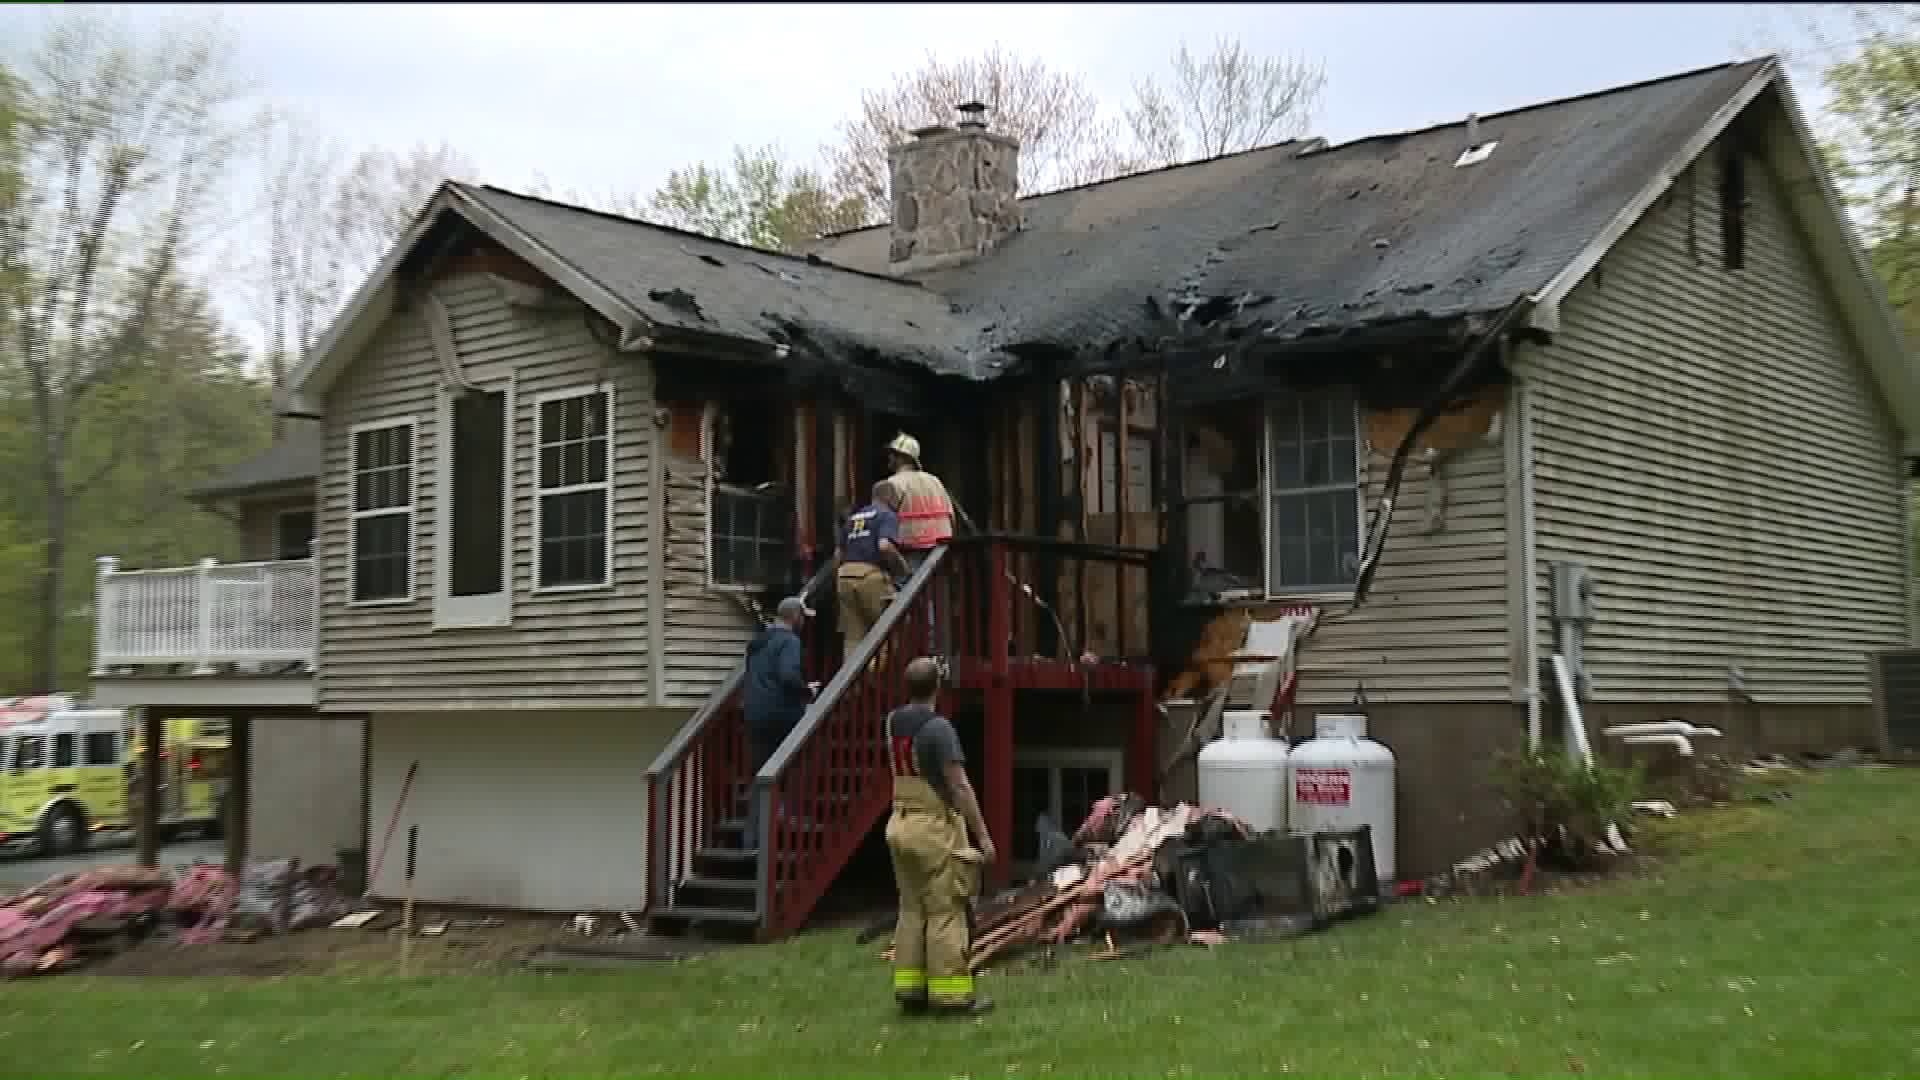 Leaking Gas Grill Blamed for House Fire